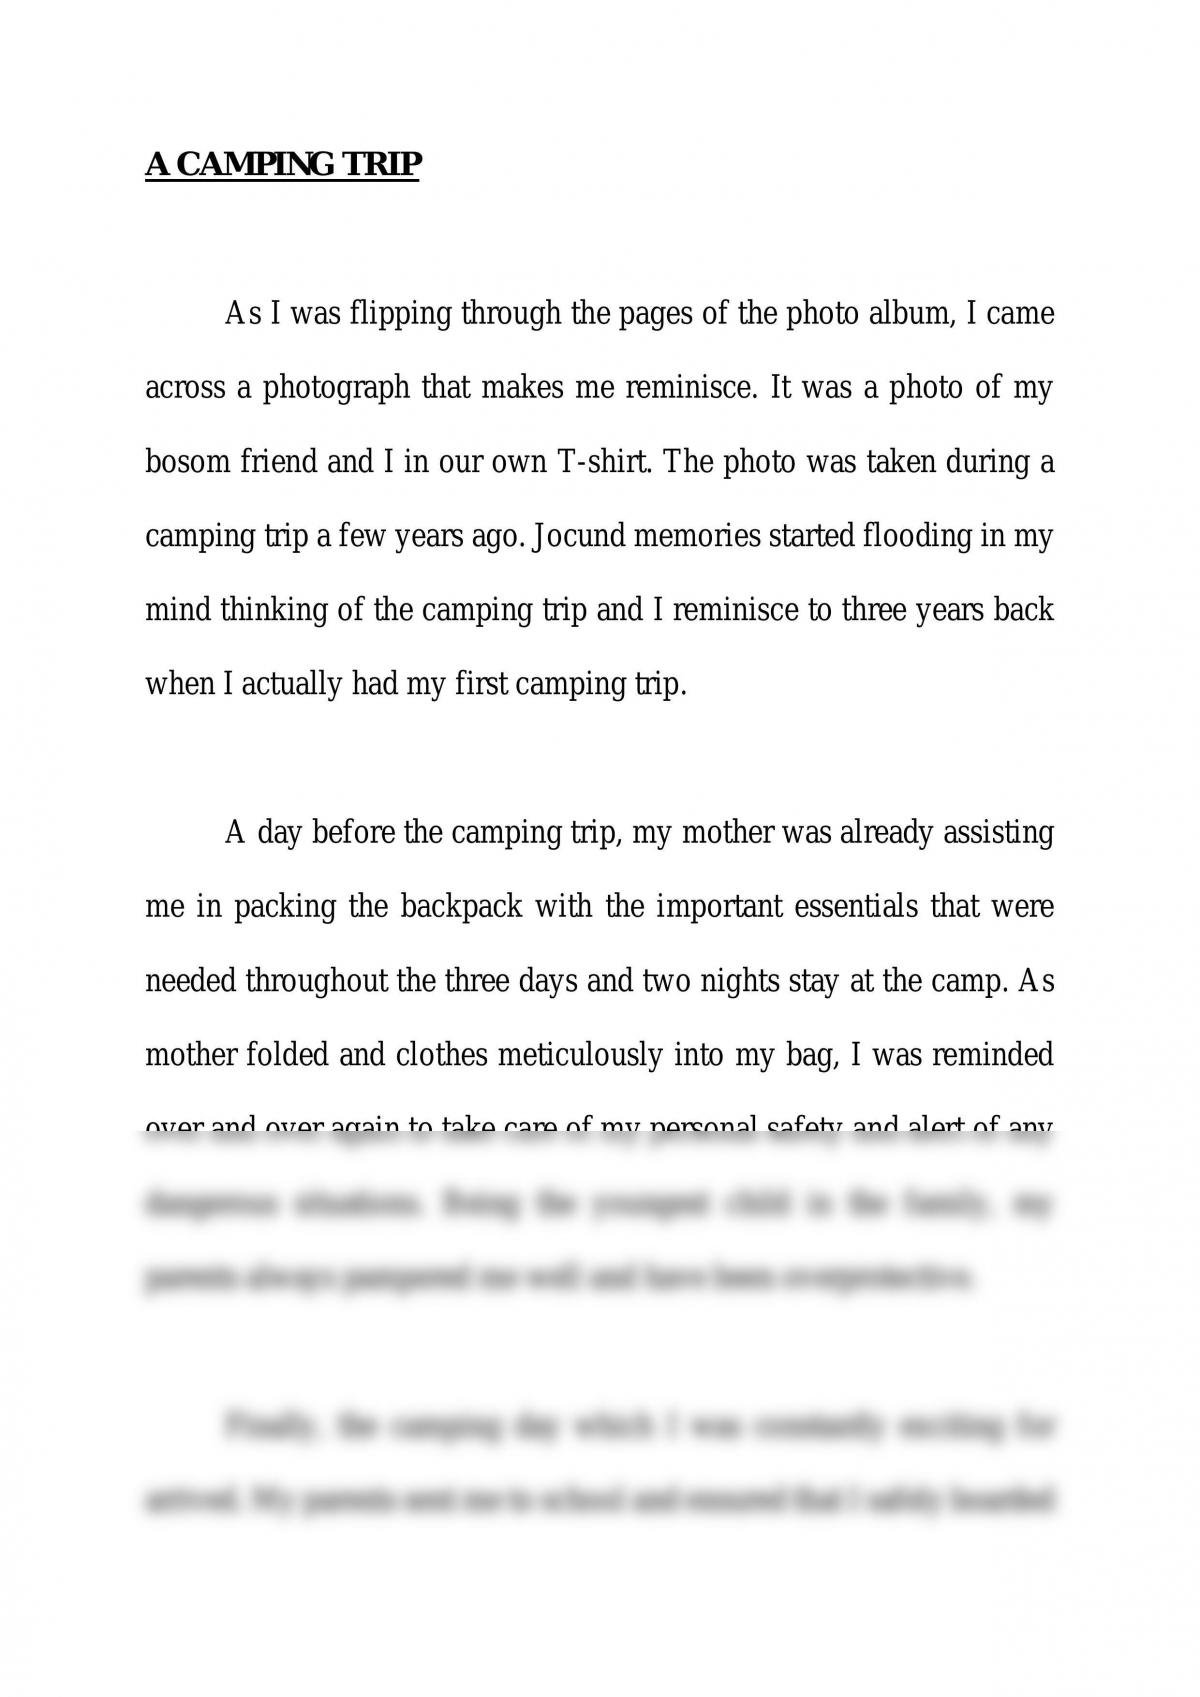 essay for camping trip